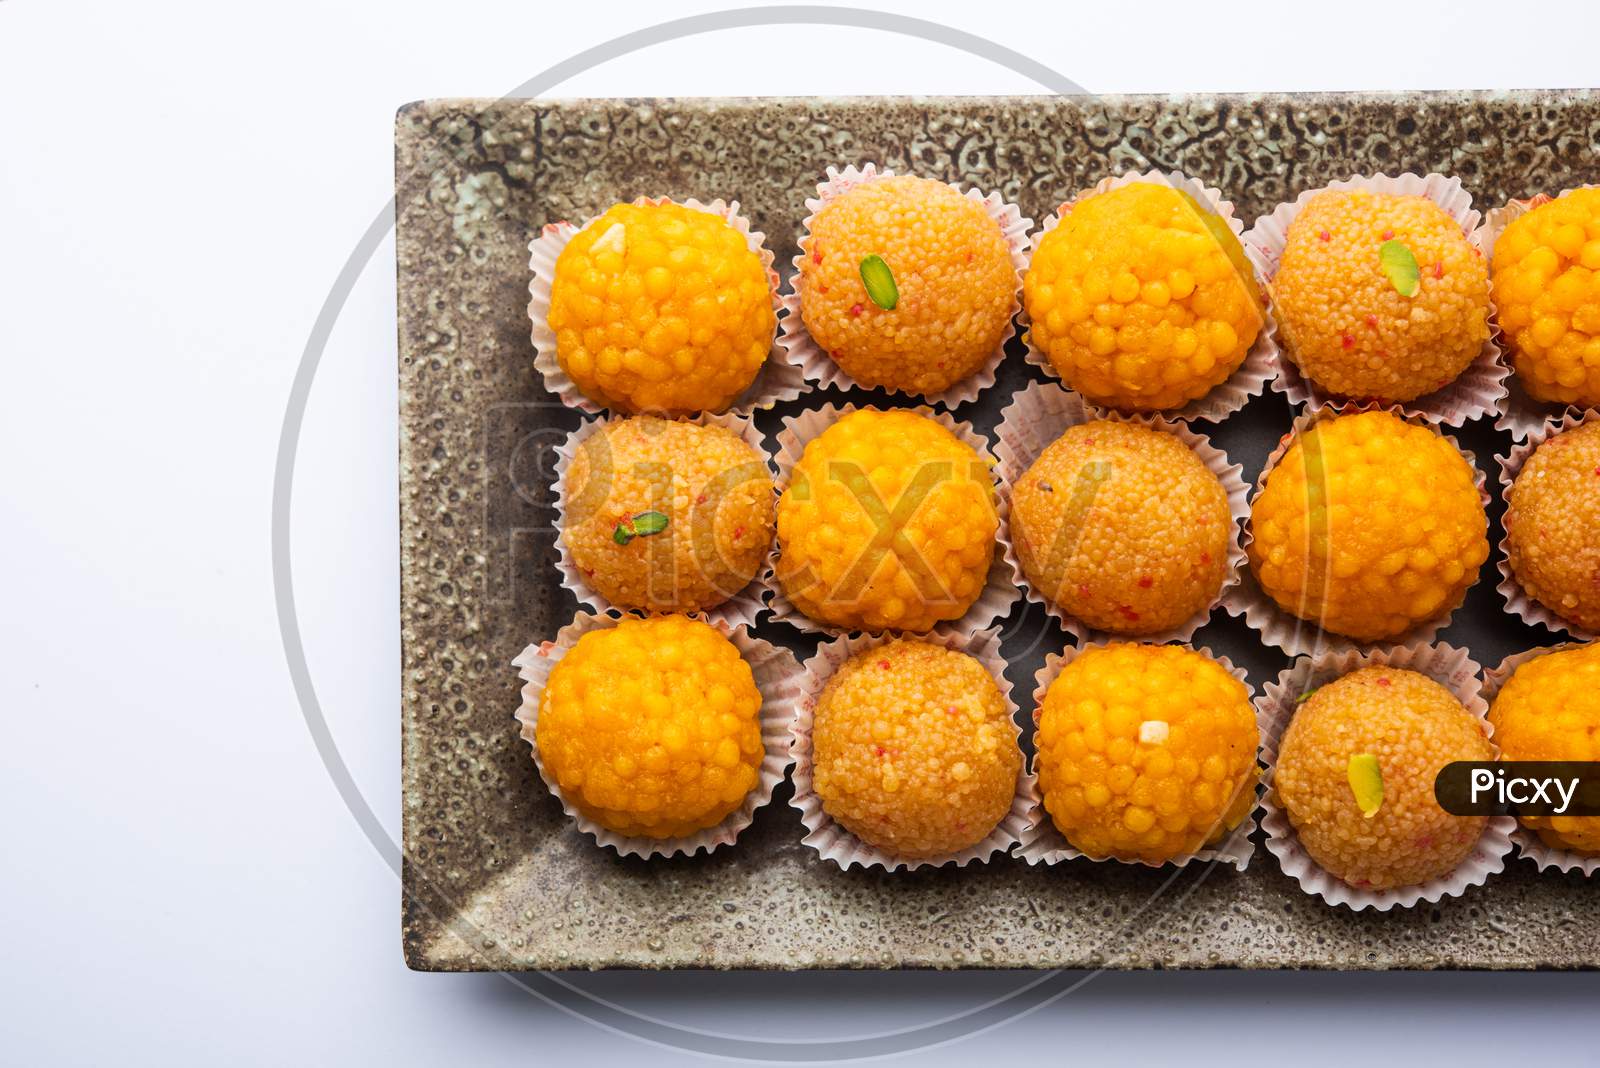 Indian Sweet Motichoor Laddoo Or Bundi Laddu Made Of Gram Flour Very Small Balls Or Boondis Which Are Deep Fried And Soaked In Sugar Syrup Before Making Balls